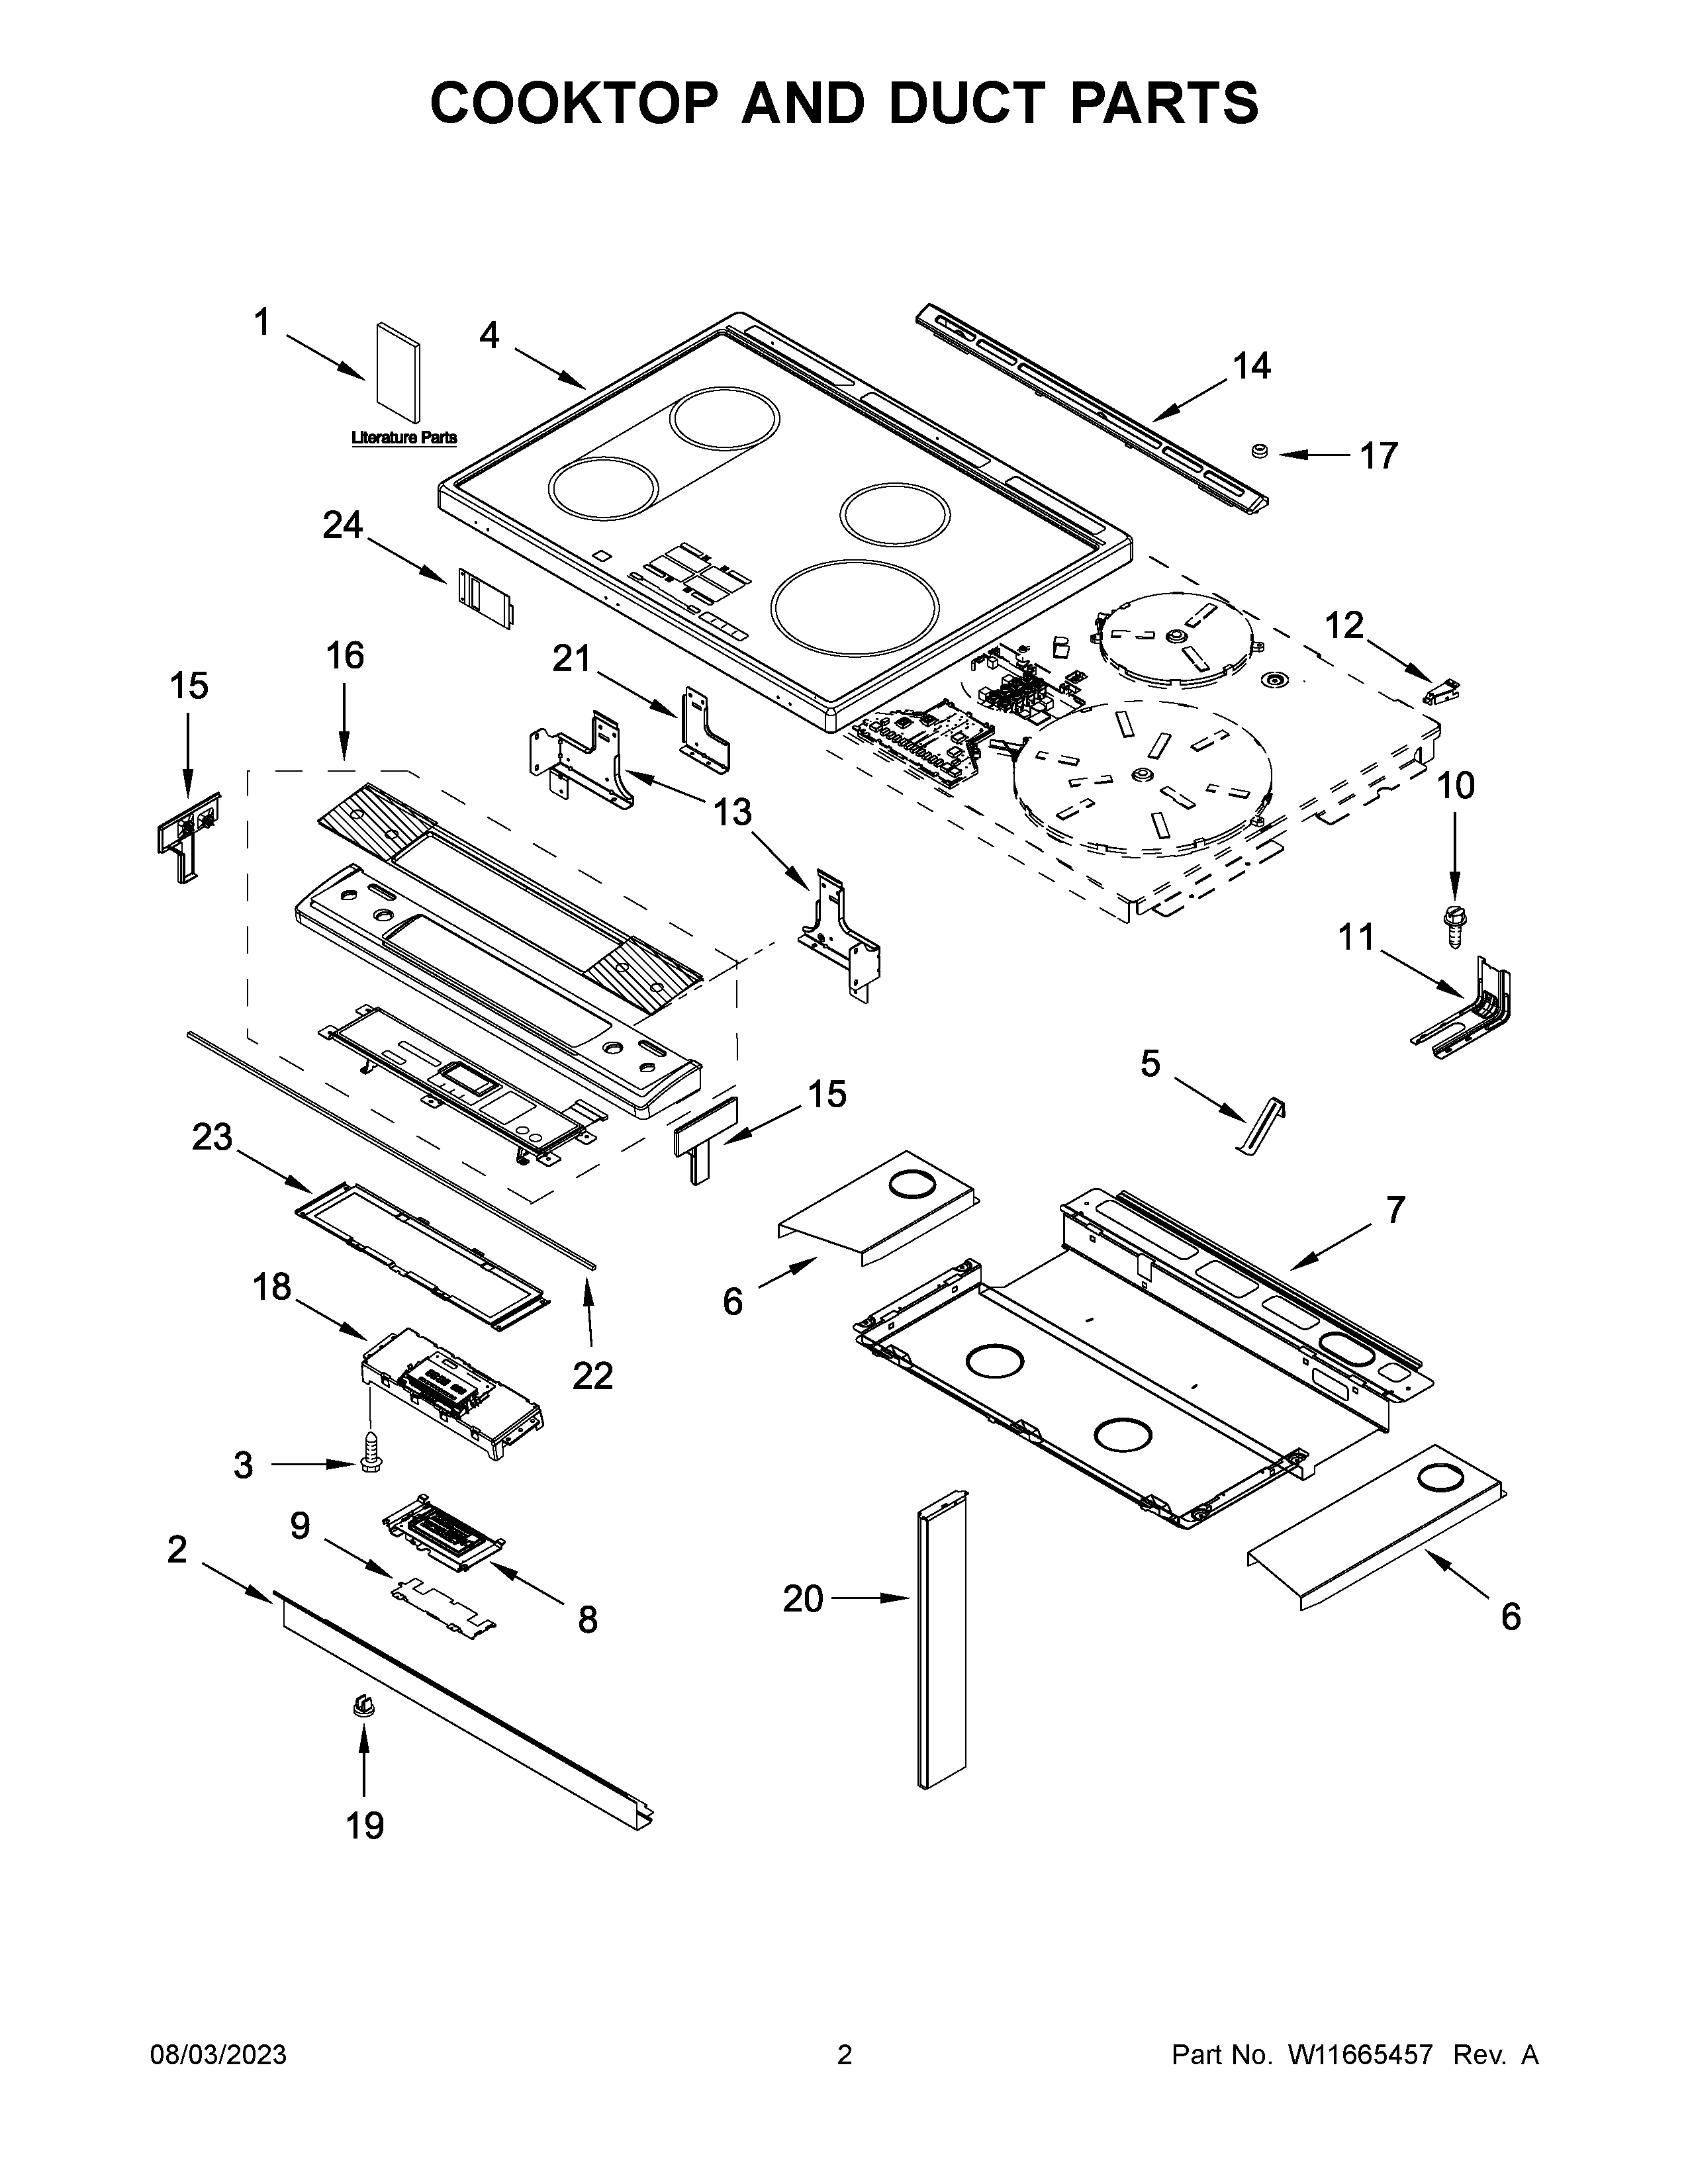 02 - COOKTOP AND DUCT PARTS